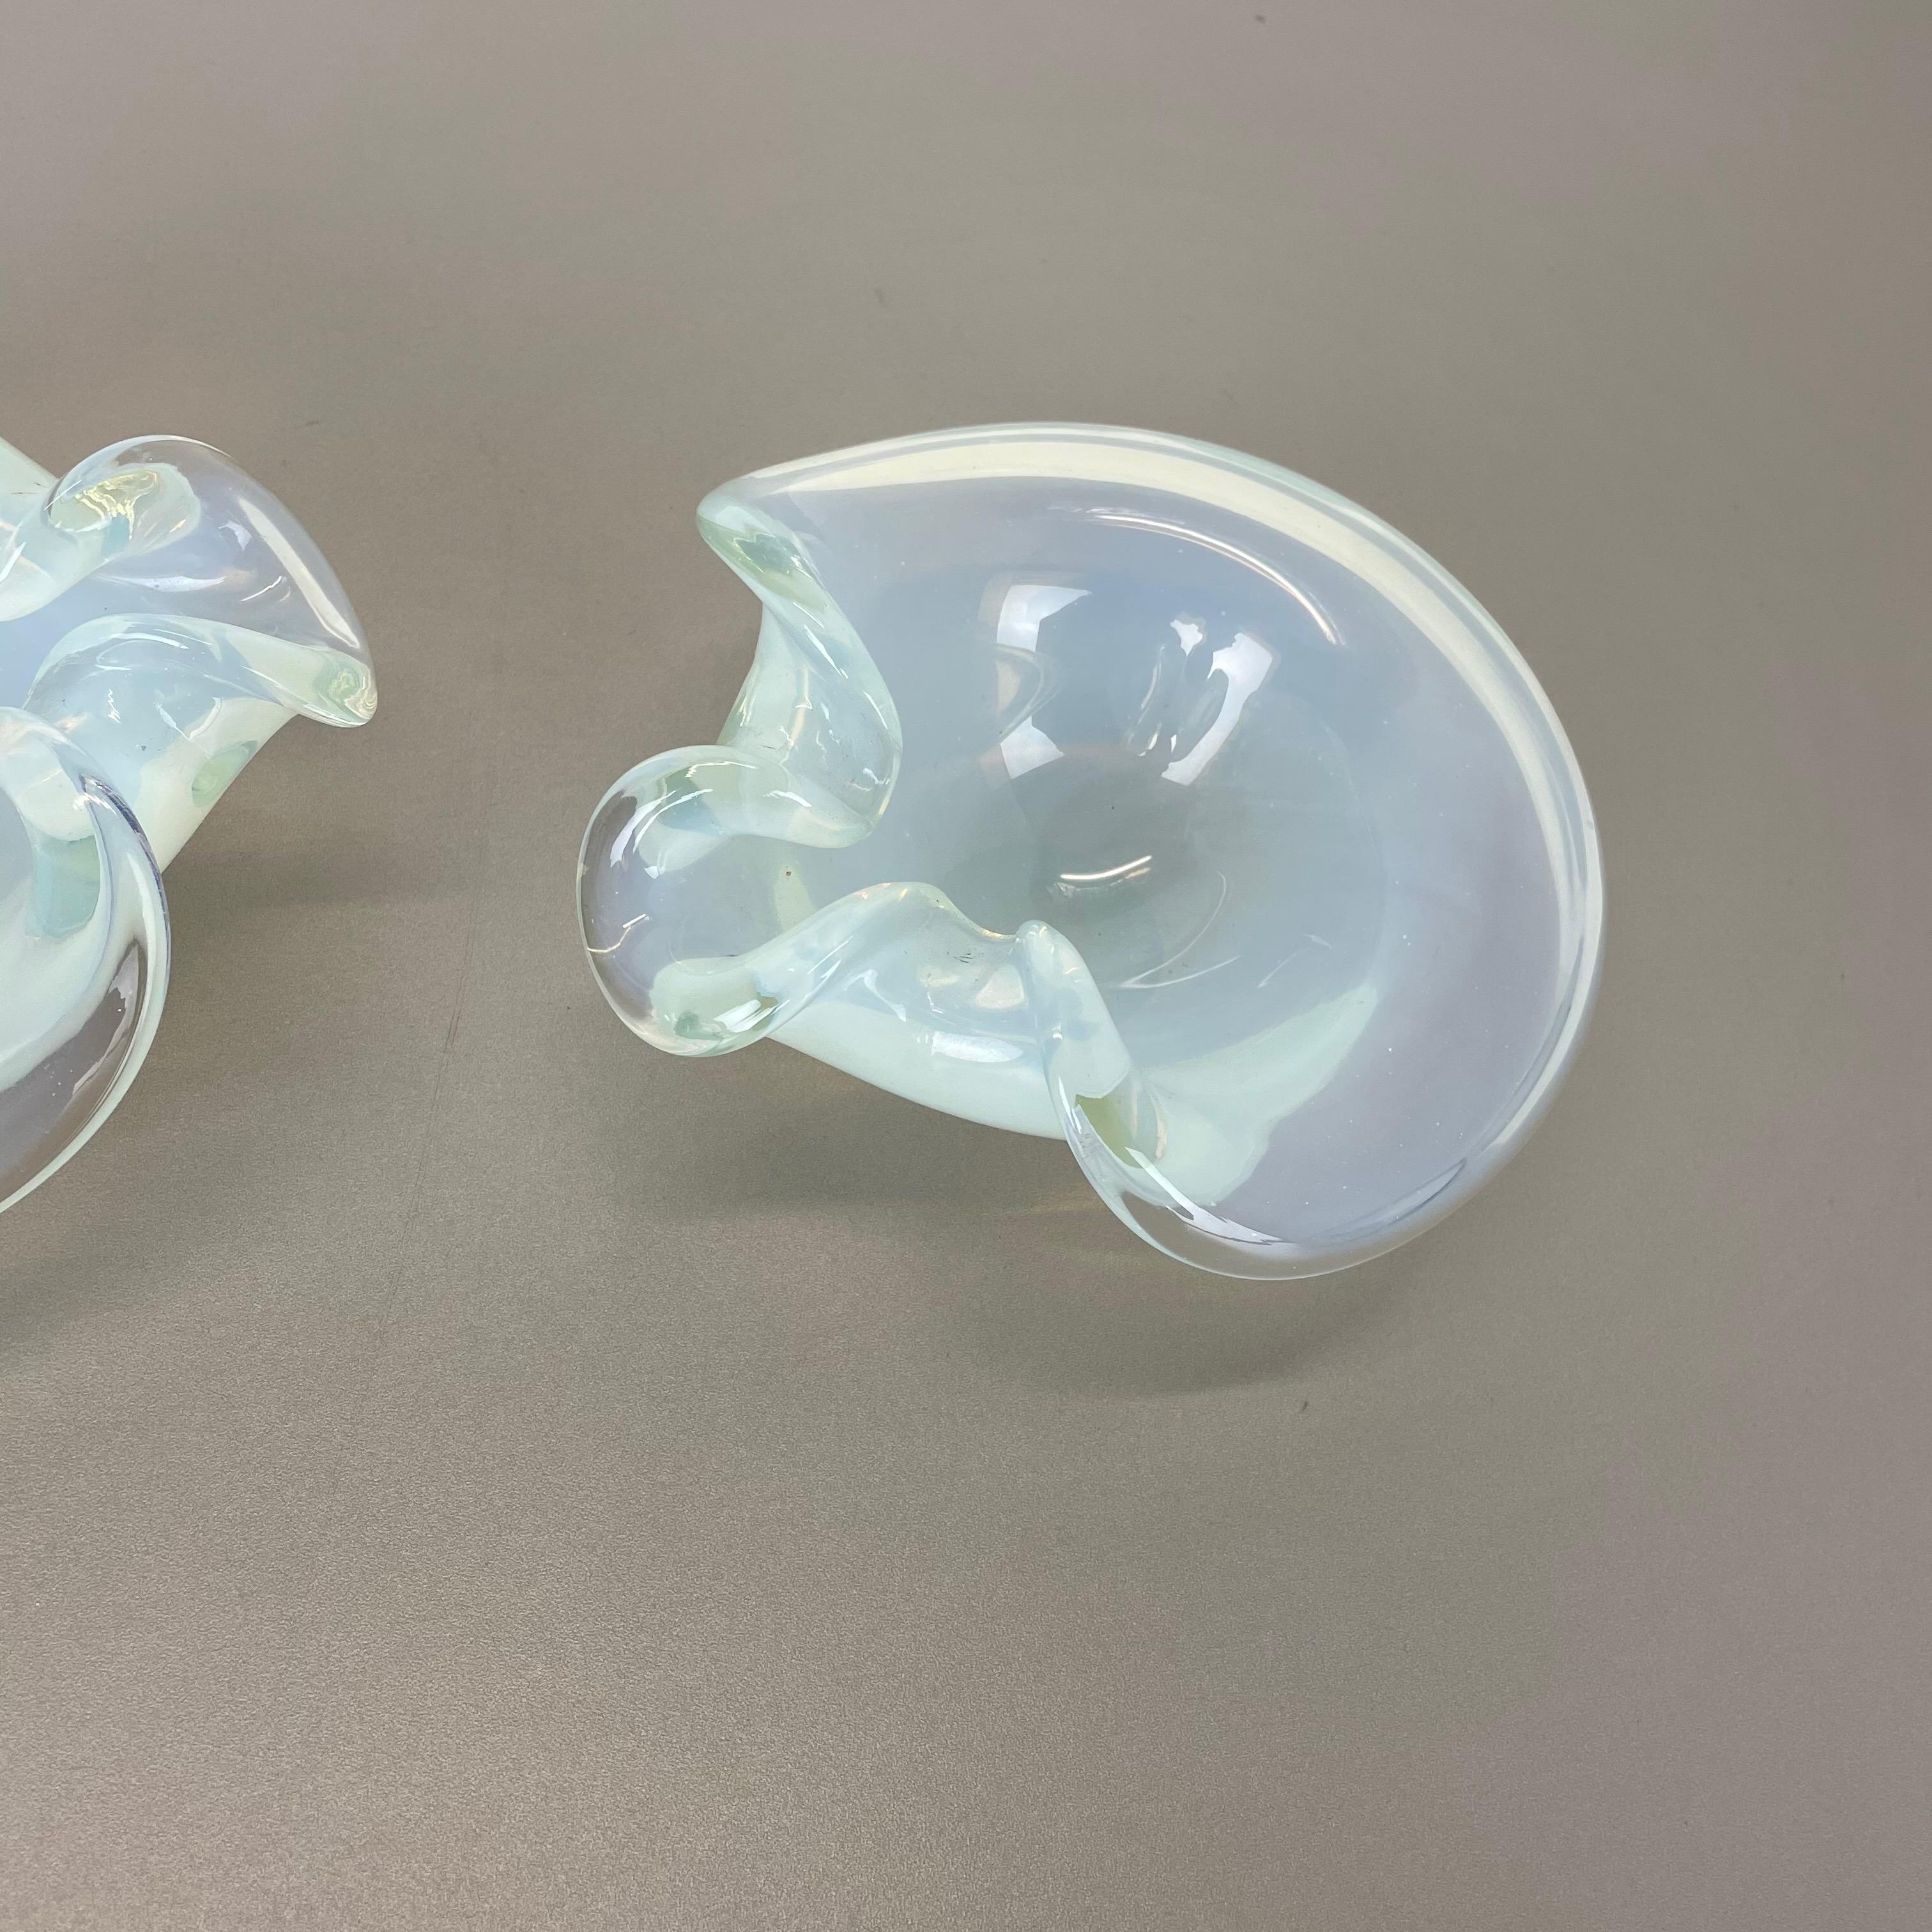 Set of 2 New Old Stock, Murano Glass Shell Bowl by Antonio da Ros Cenedese, 1960 For Sale 5